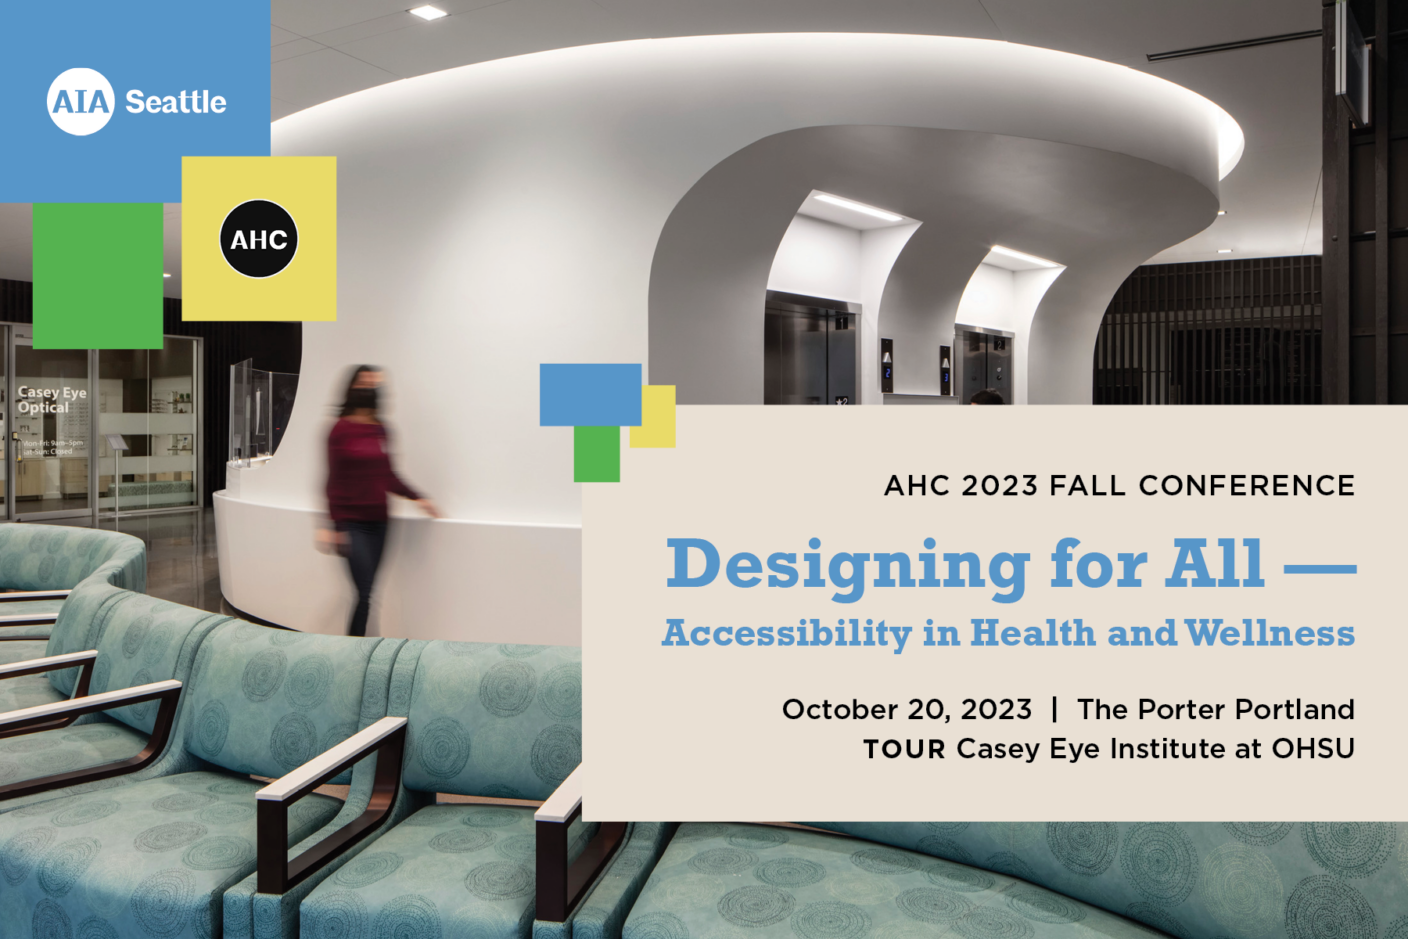 This year’s AIA AHC Fall Event includes one day of interdisciplinary presentations, design case studies, discussions, and building tours focusing on inclusive and accessible design in the healthcare environment.